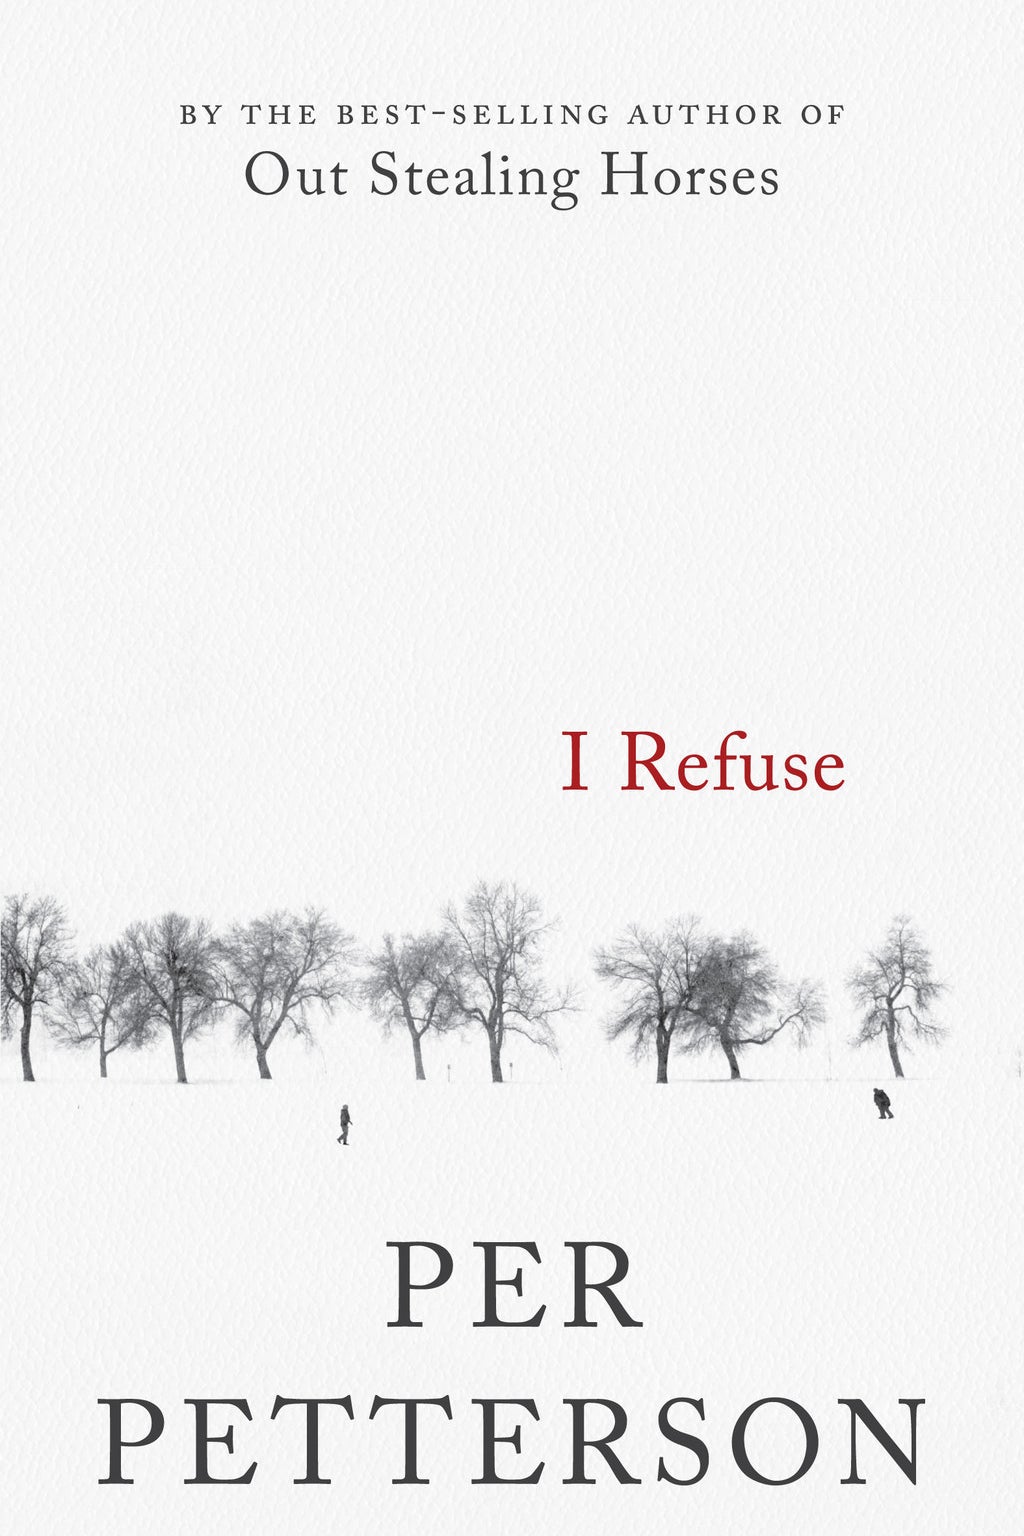 I Refuse by Per Petterson translated by Don Bartlett 